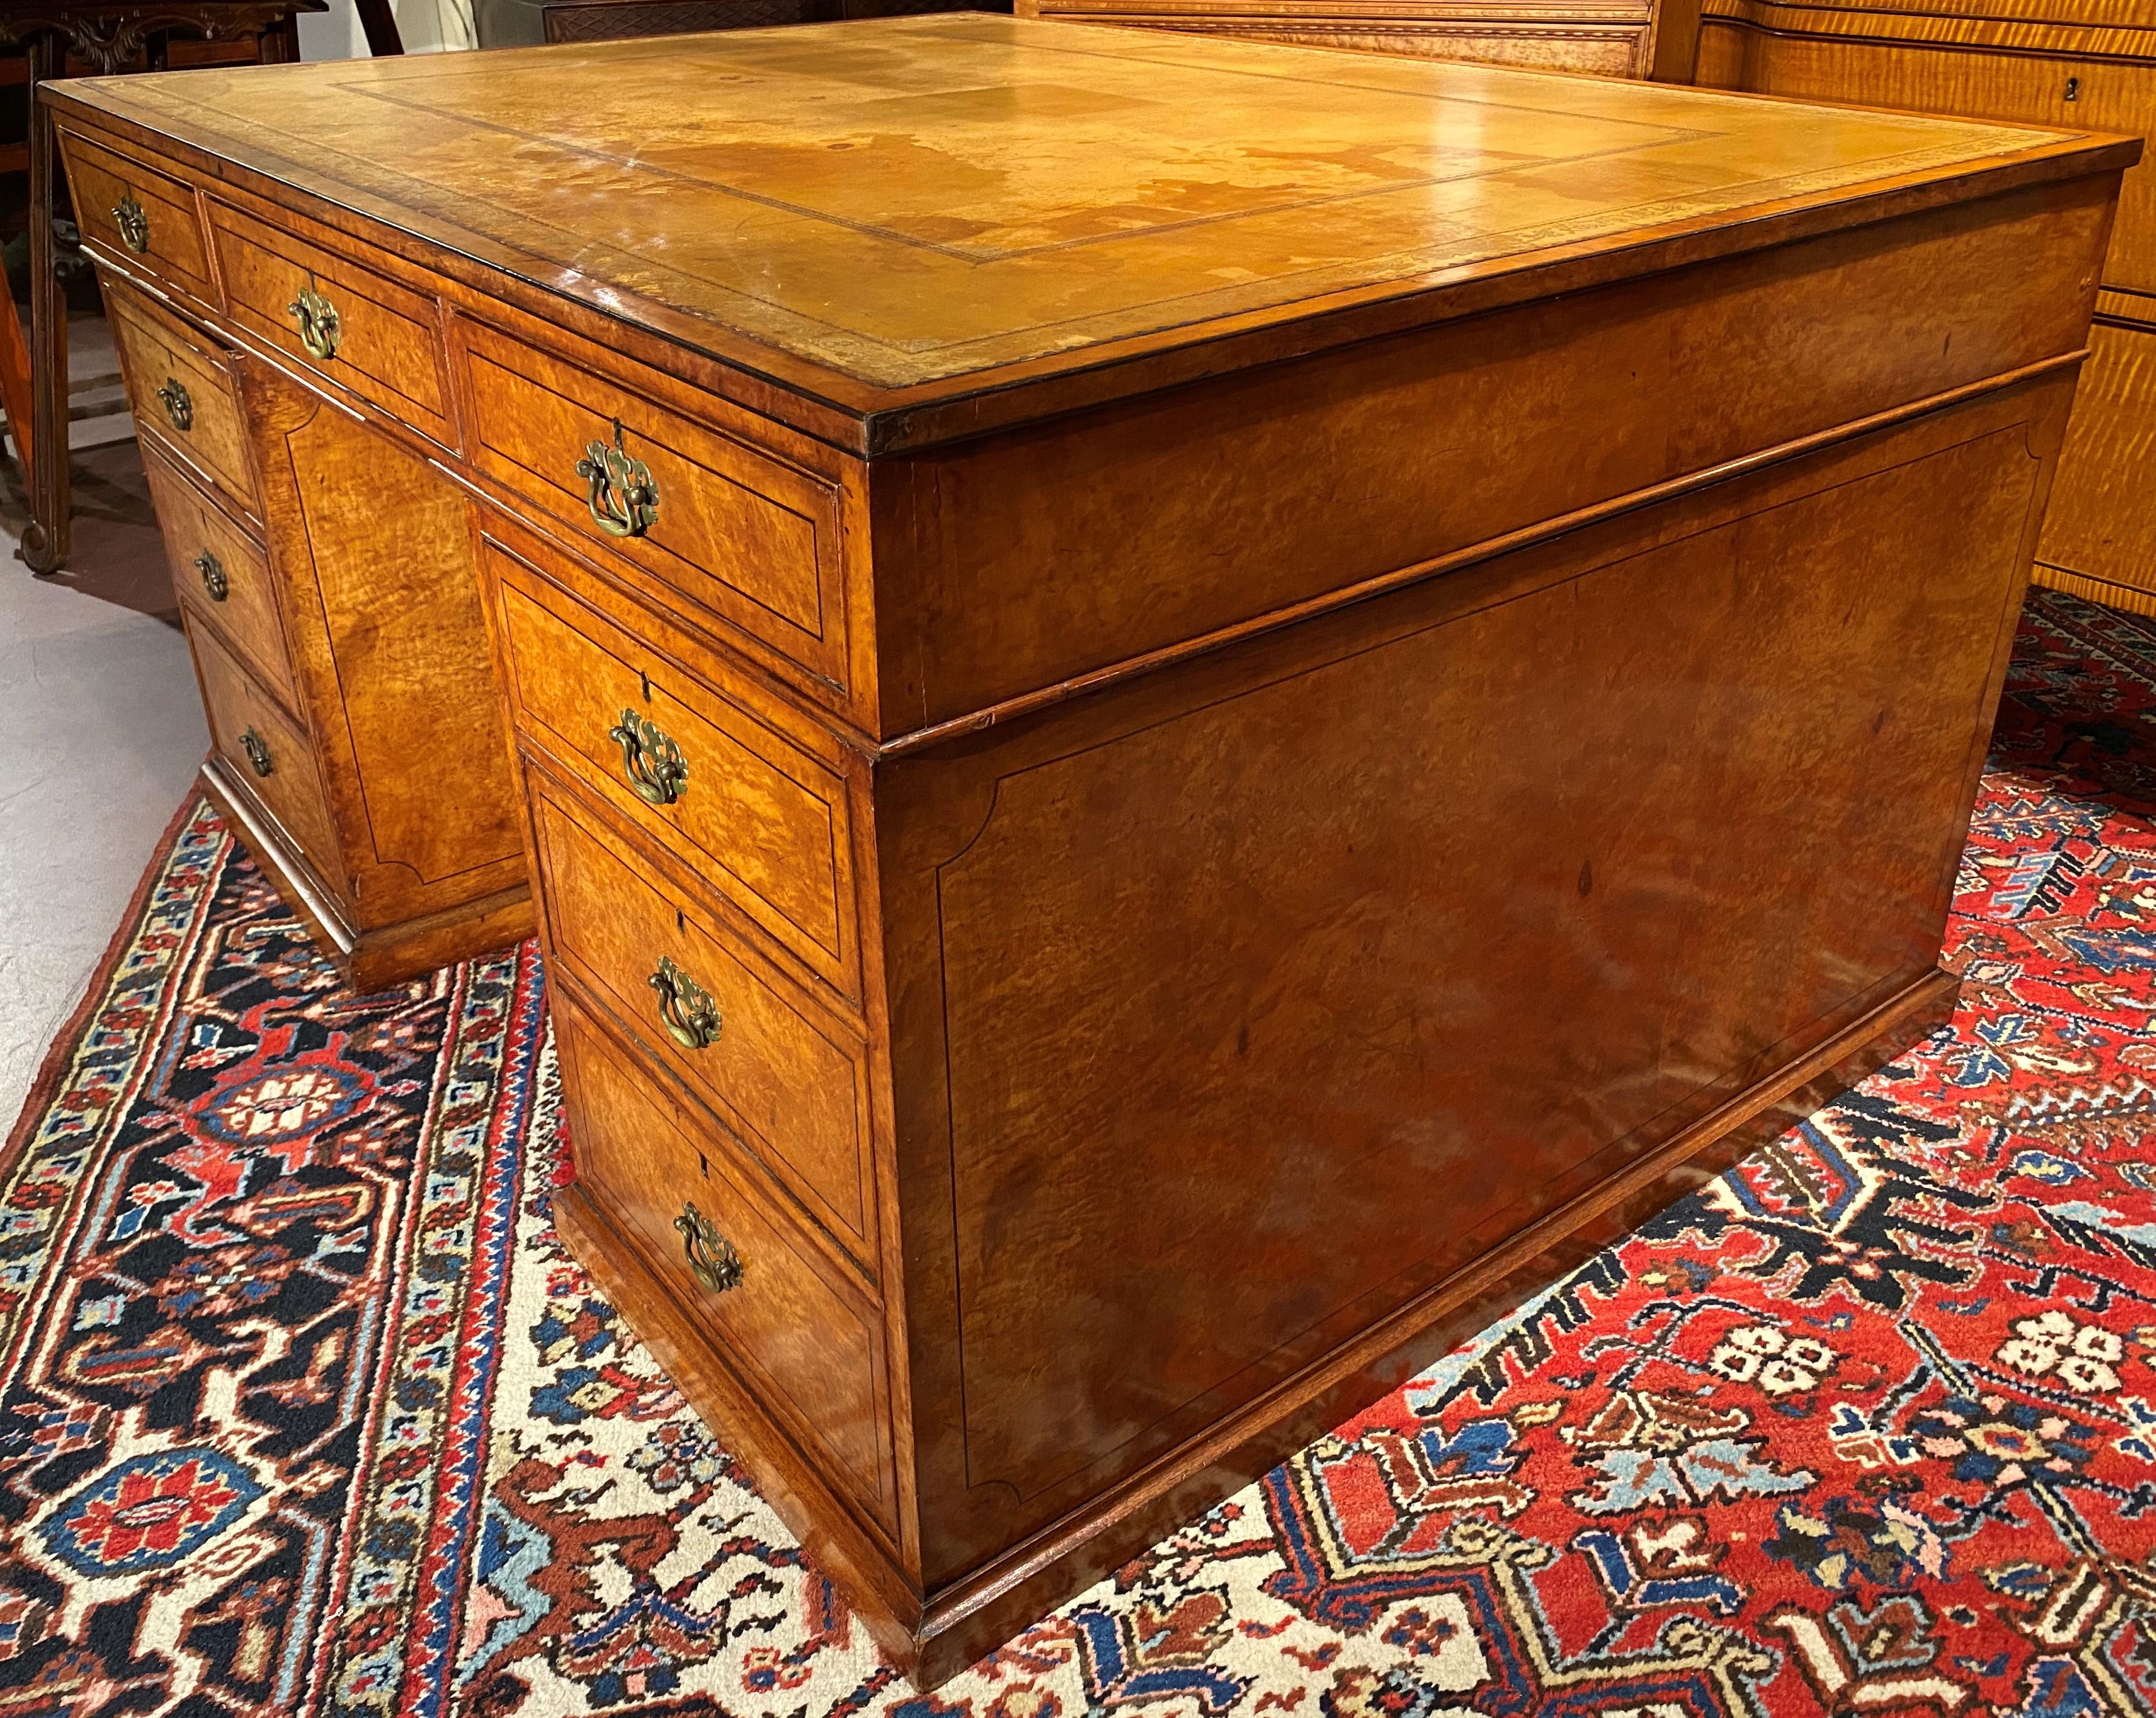 Cast 19th Century English Birdseye Maple Partners Desk with Tooled Leather Top For Sale